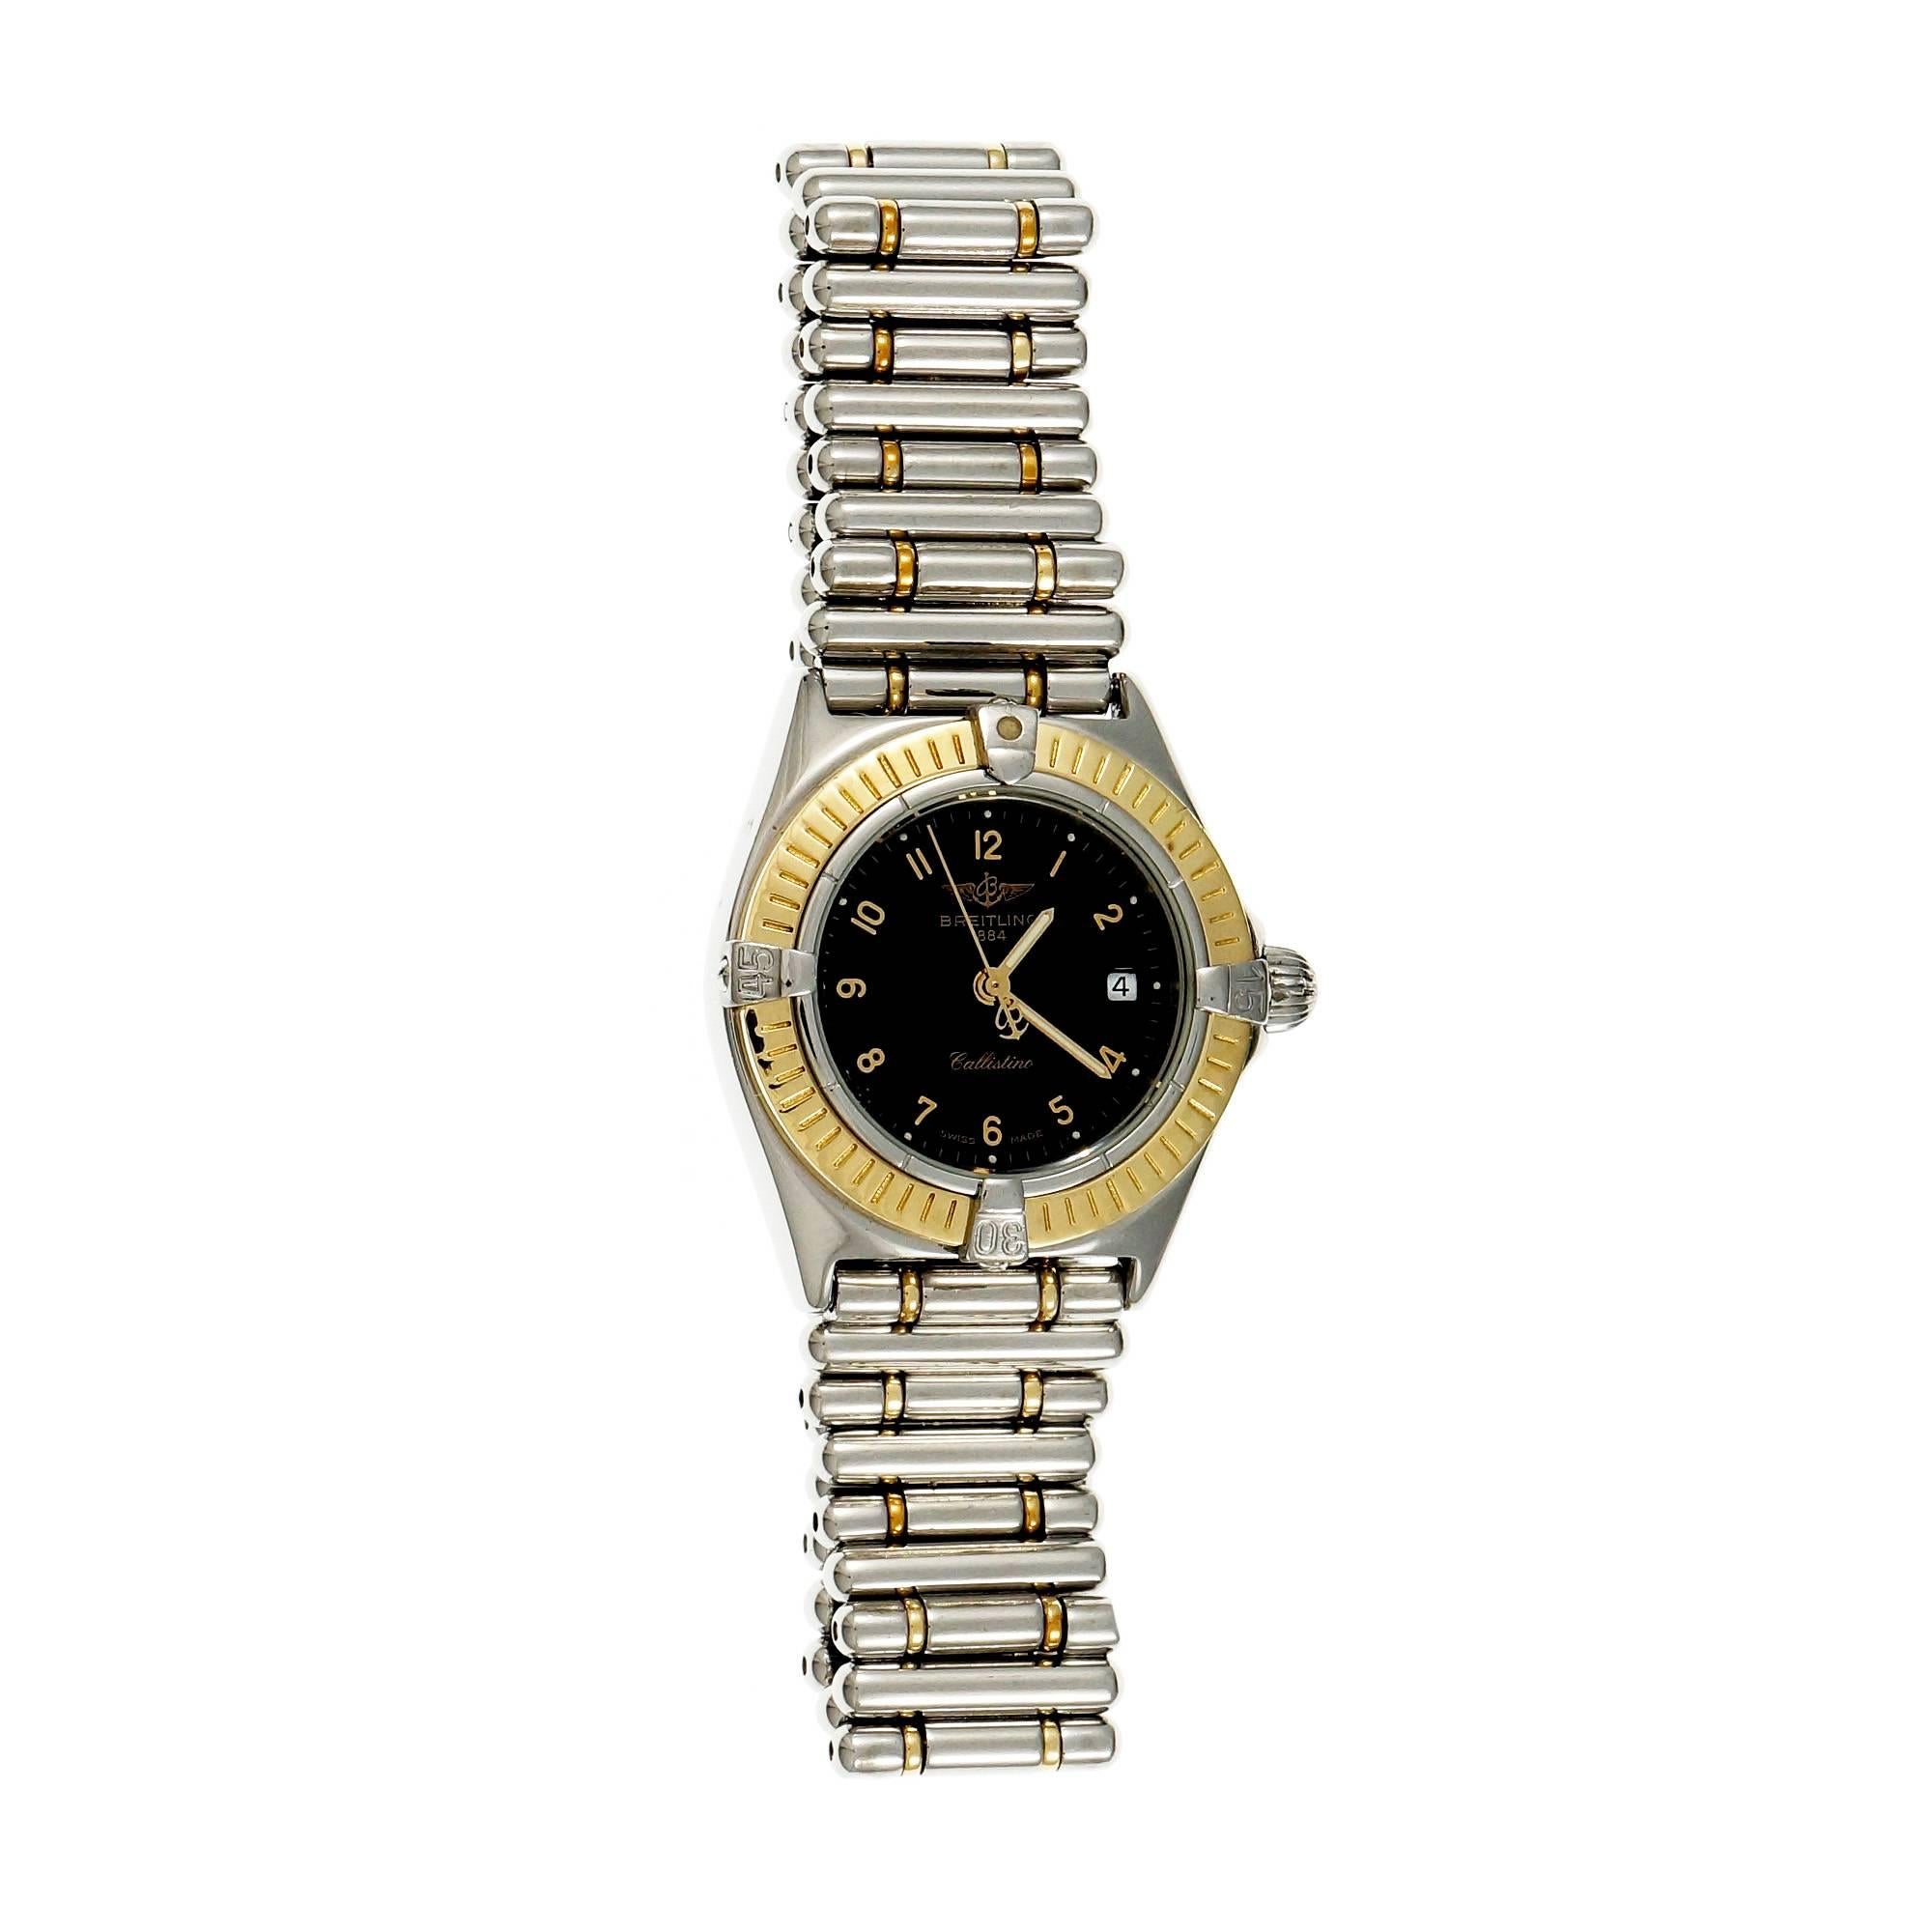 Breitling ladies Callistino 18k yellow gold and steel watch with 18k gold and steel Breitling bullet band. Original black dial. Breitling movement.

62.6 grams 
Band length: 6.5 inches
18k yellow gold & steel
 Length: 32mm 
Width: 28mm 
Band